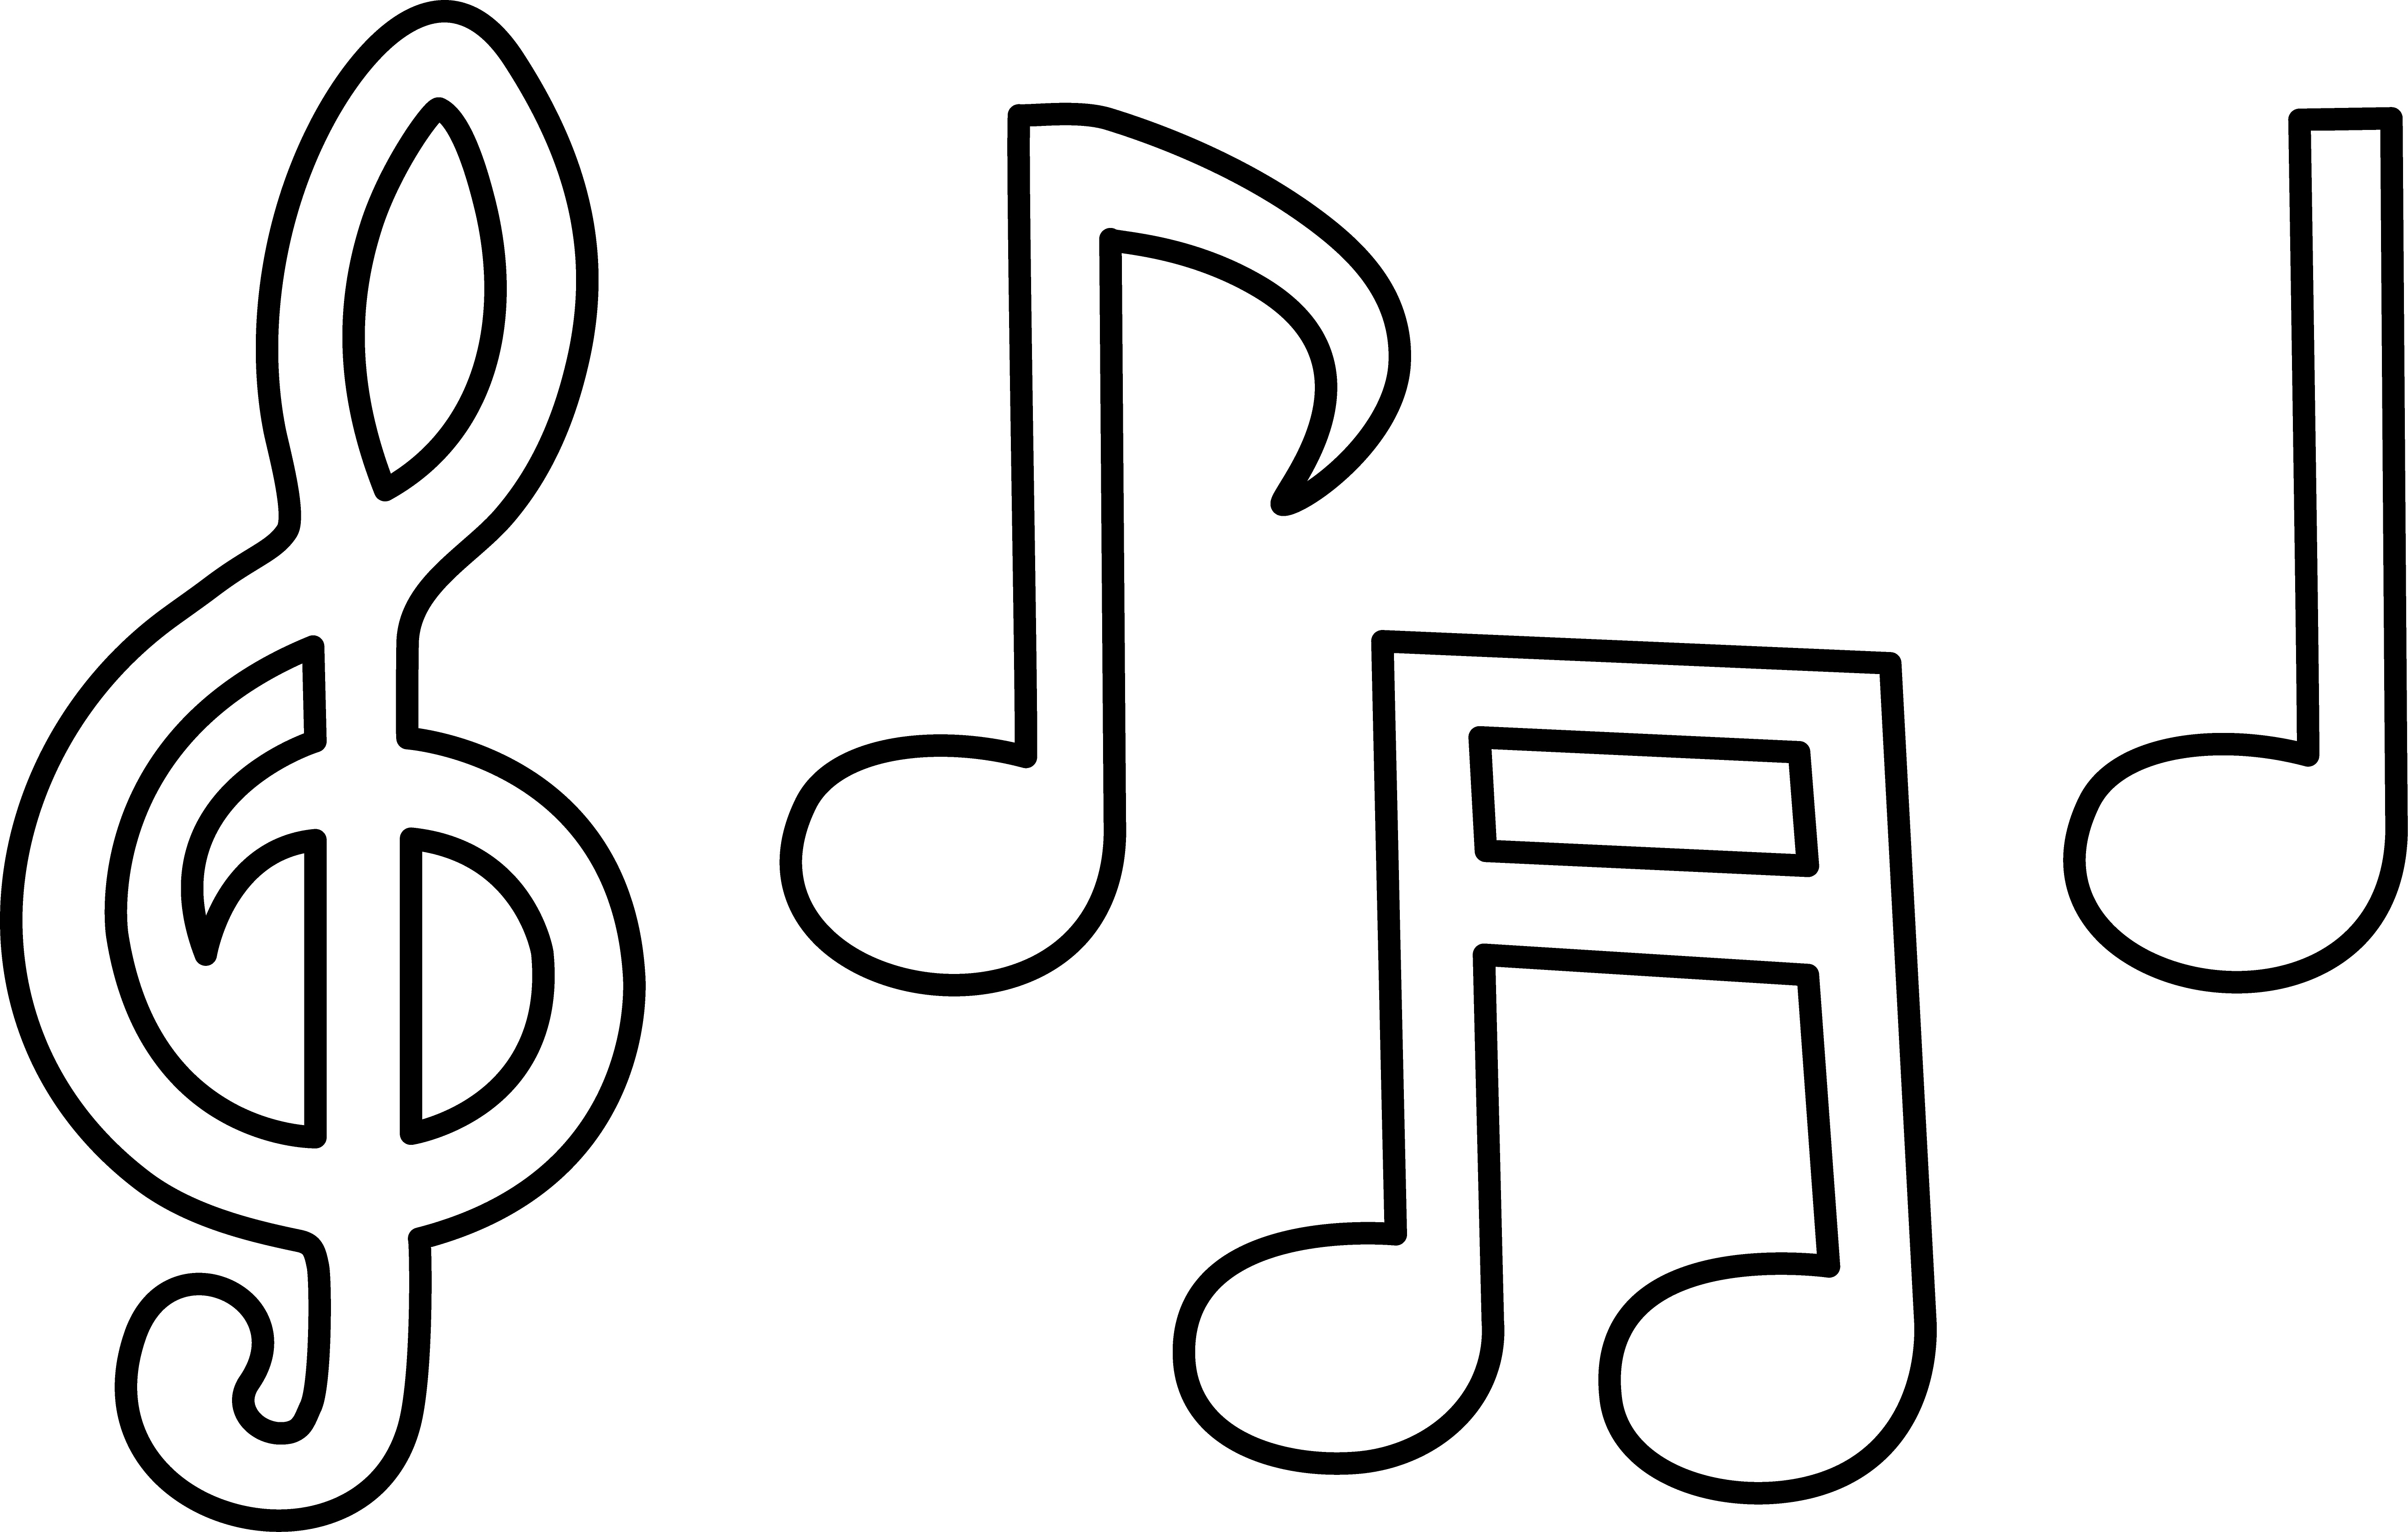 Printable Music Notes Coloring Pages